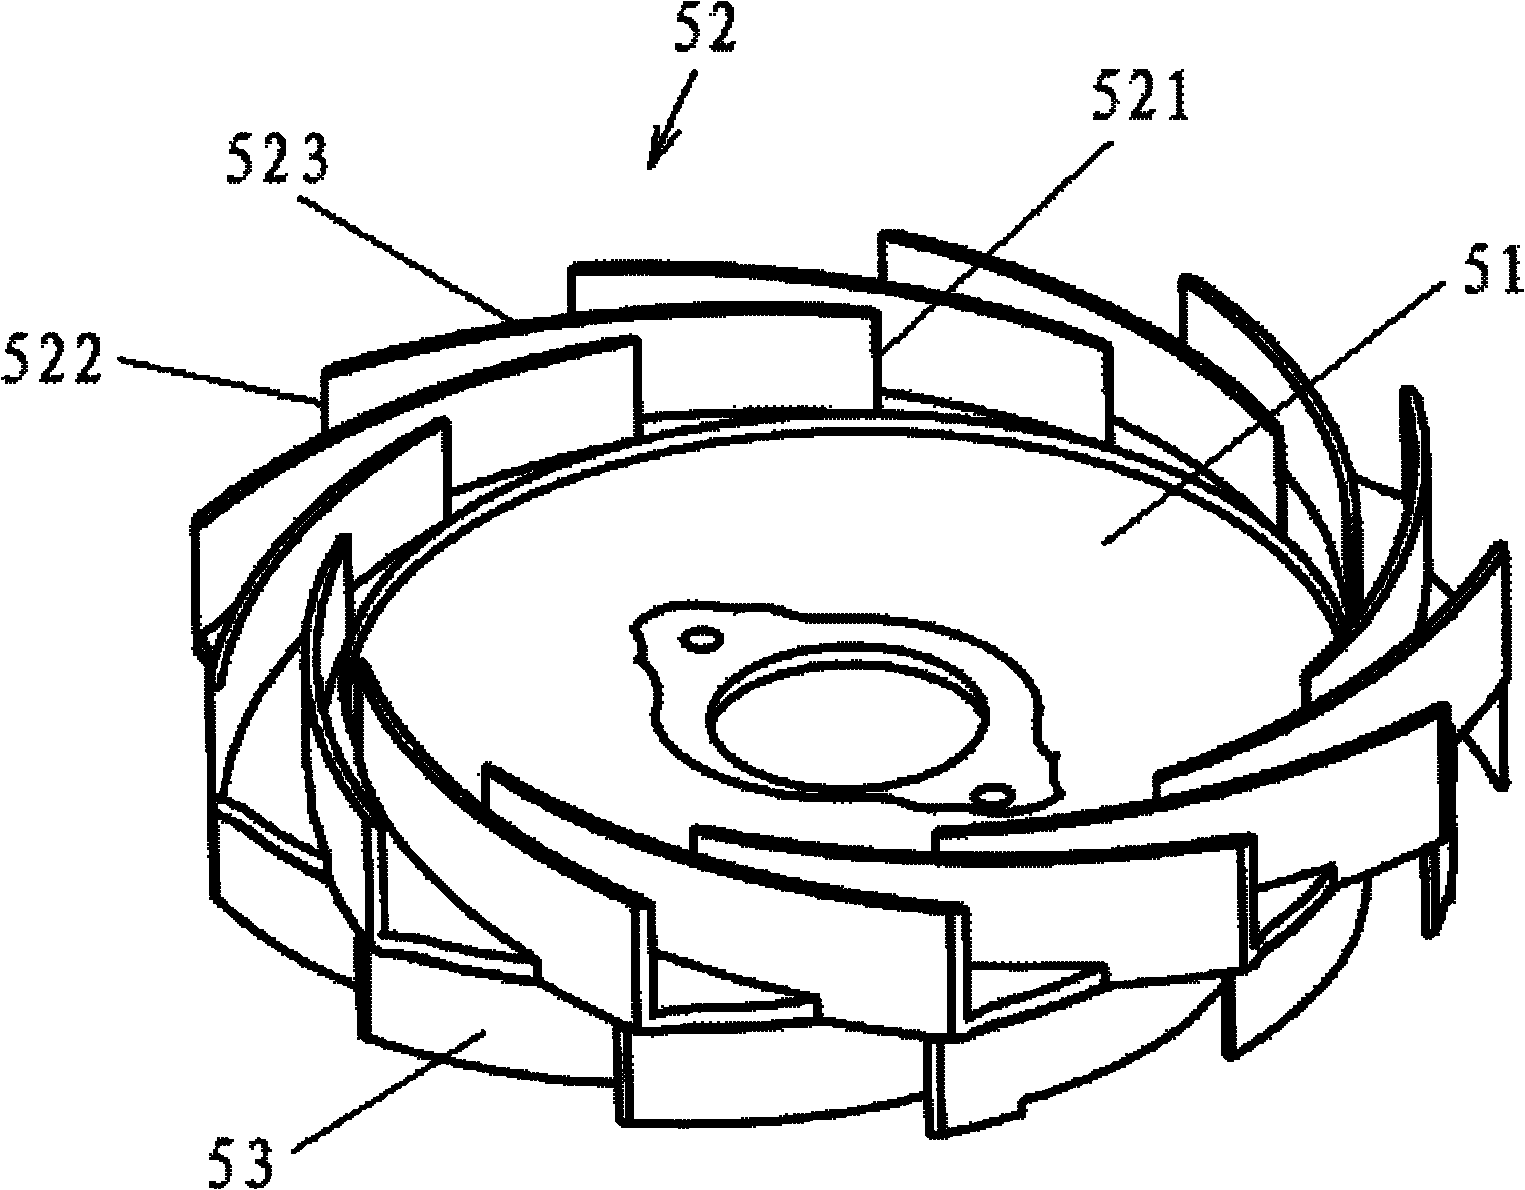 Diffuser and centrifugal fan equipped with same